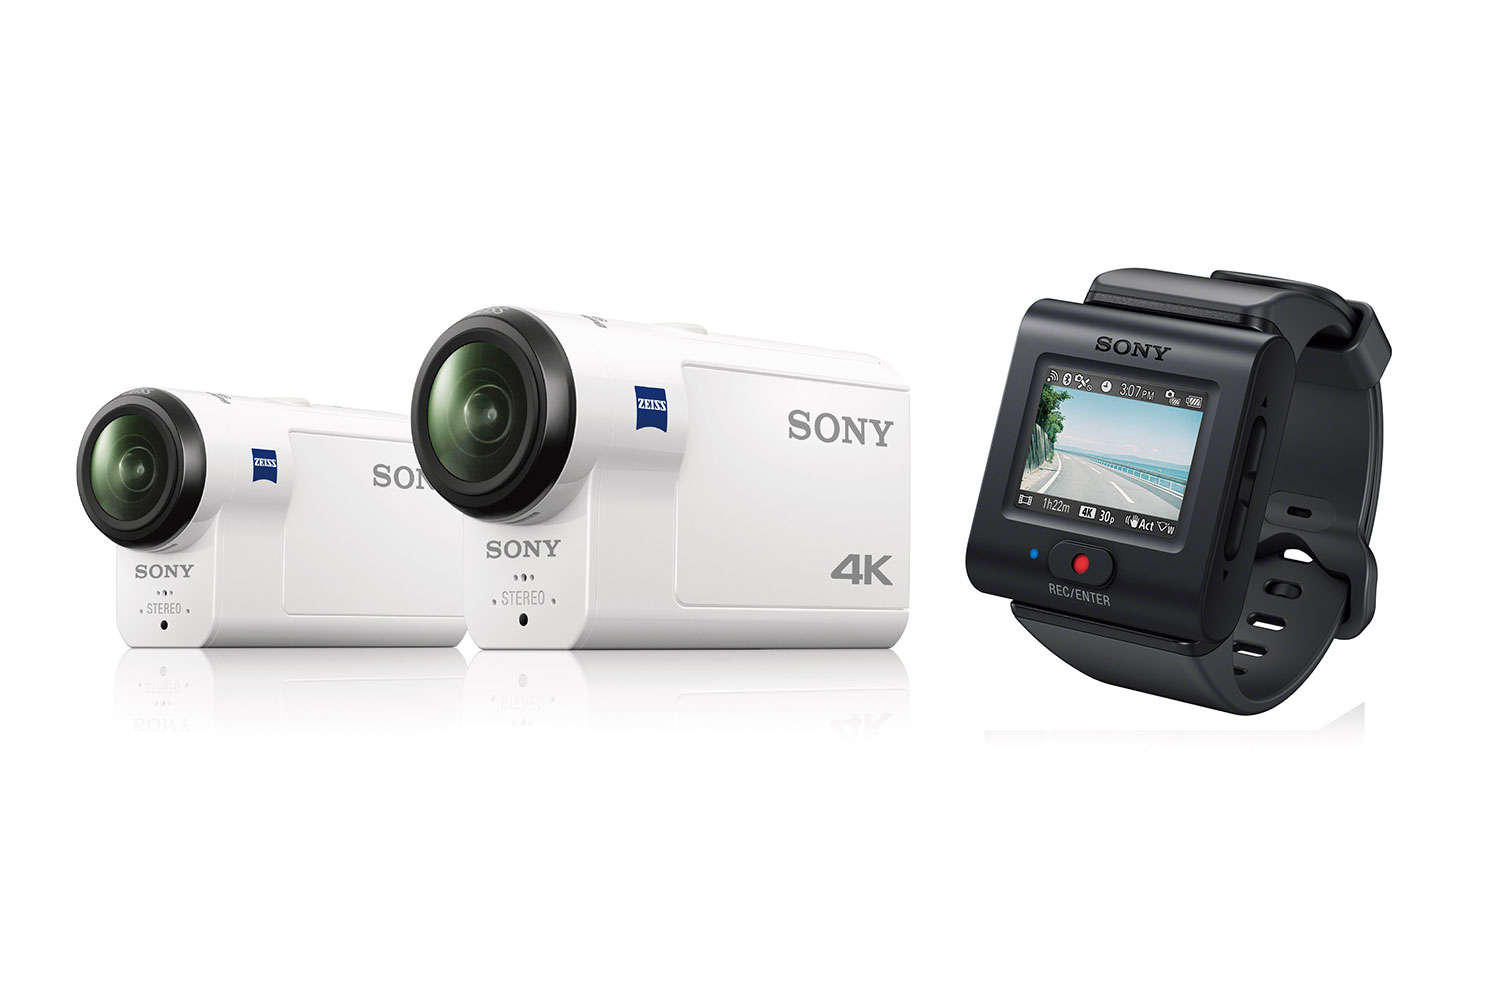 Sony HDR-AS300, FDR-X3000, and Live View Remote